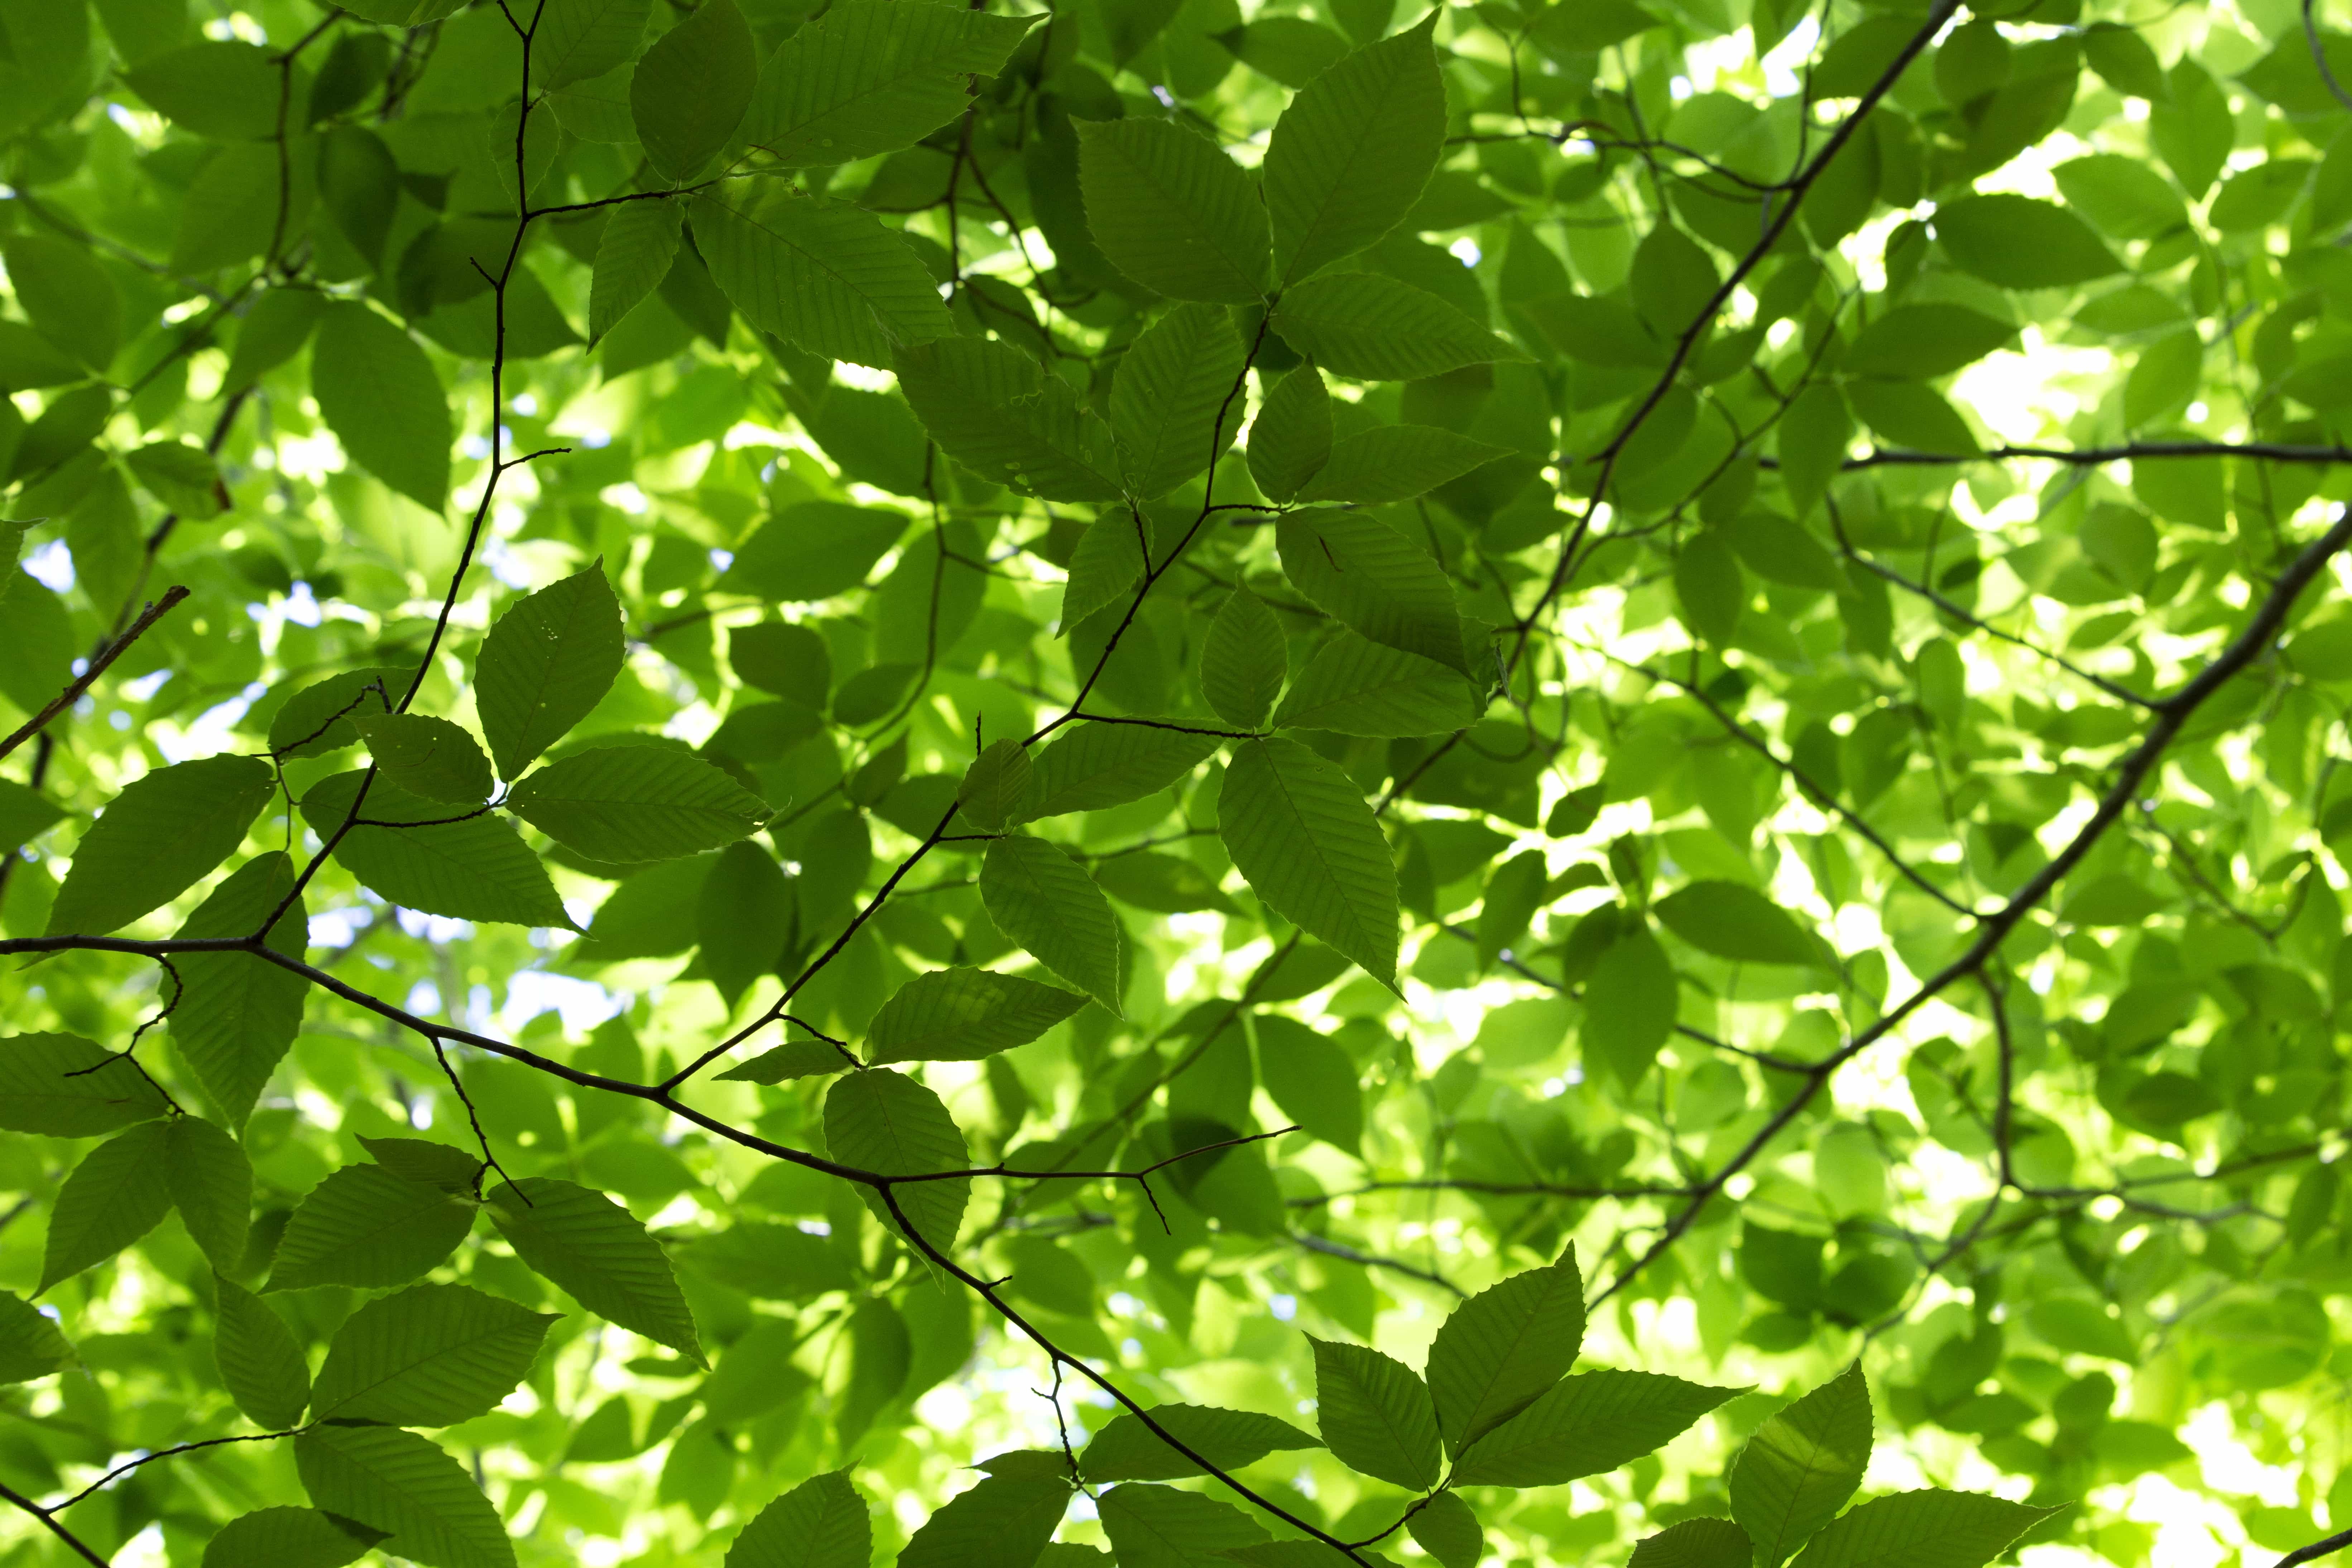 Free picture: branches, chlorophyll, ecology, forest, green leaves, shadow,  spring time, plant, leaf, fair weather